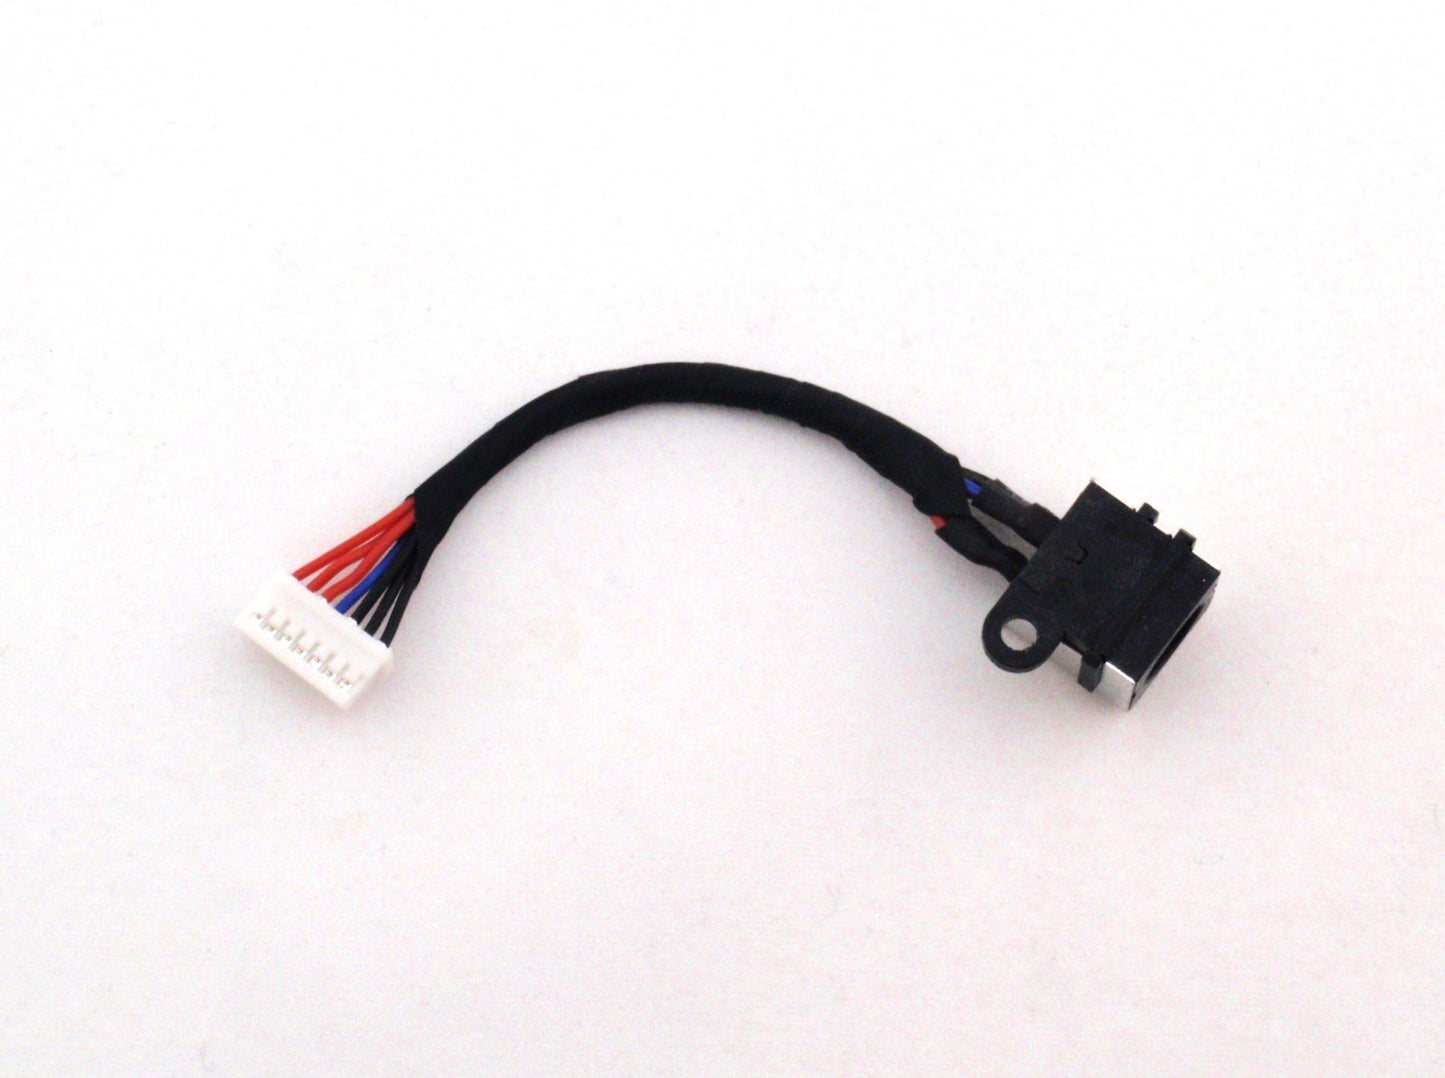 Dell New DC In Power Jack Charging Port Connector Socket Cable Harness XPS 14 L401x 35070WC00-600-G 02KJCF 2KJCF